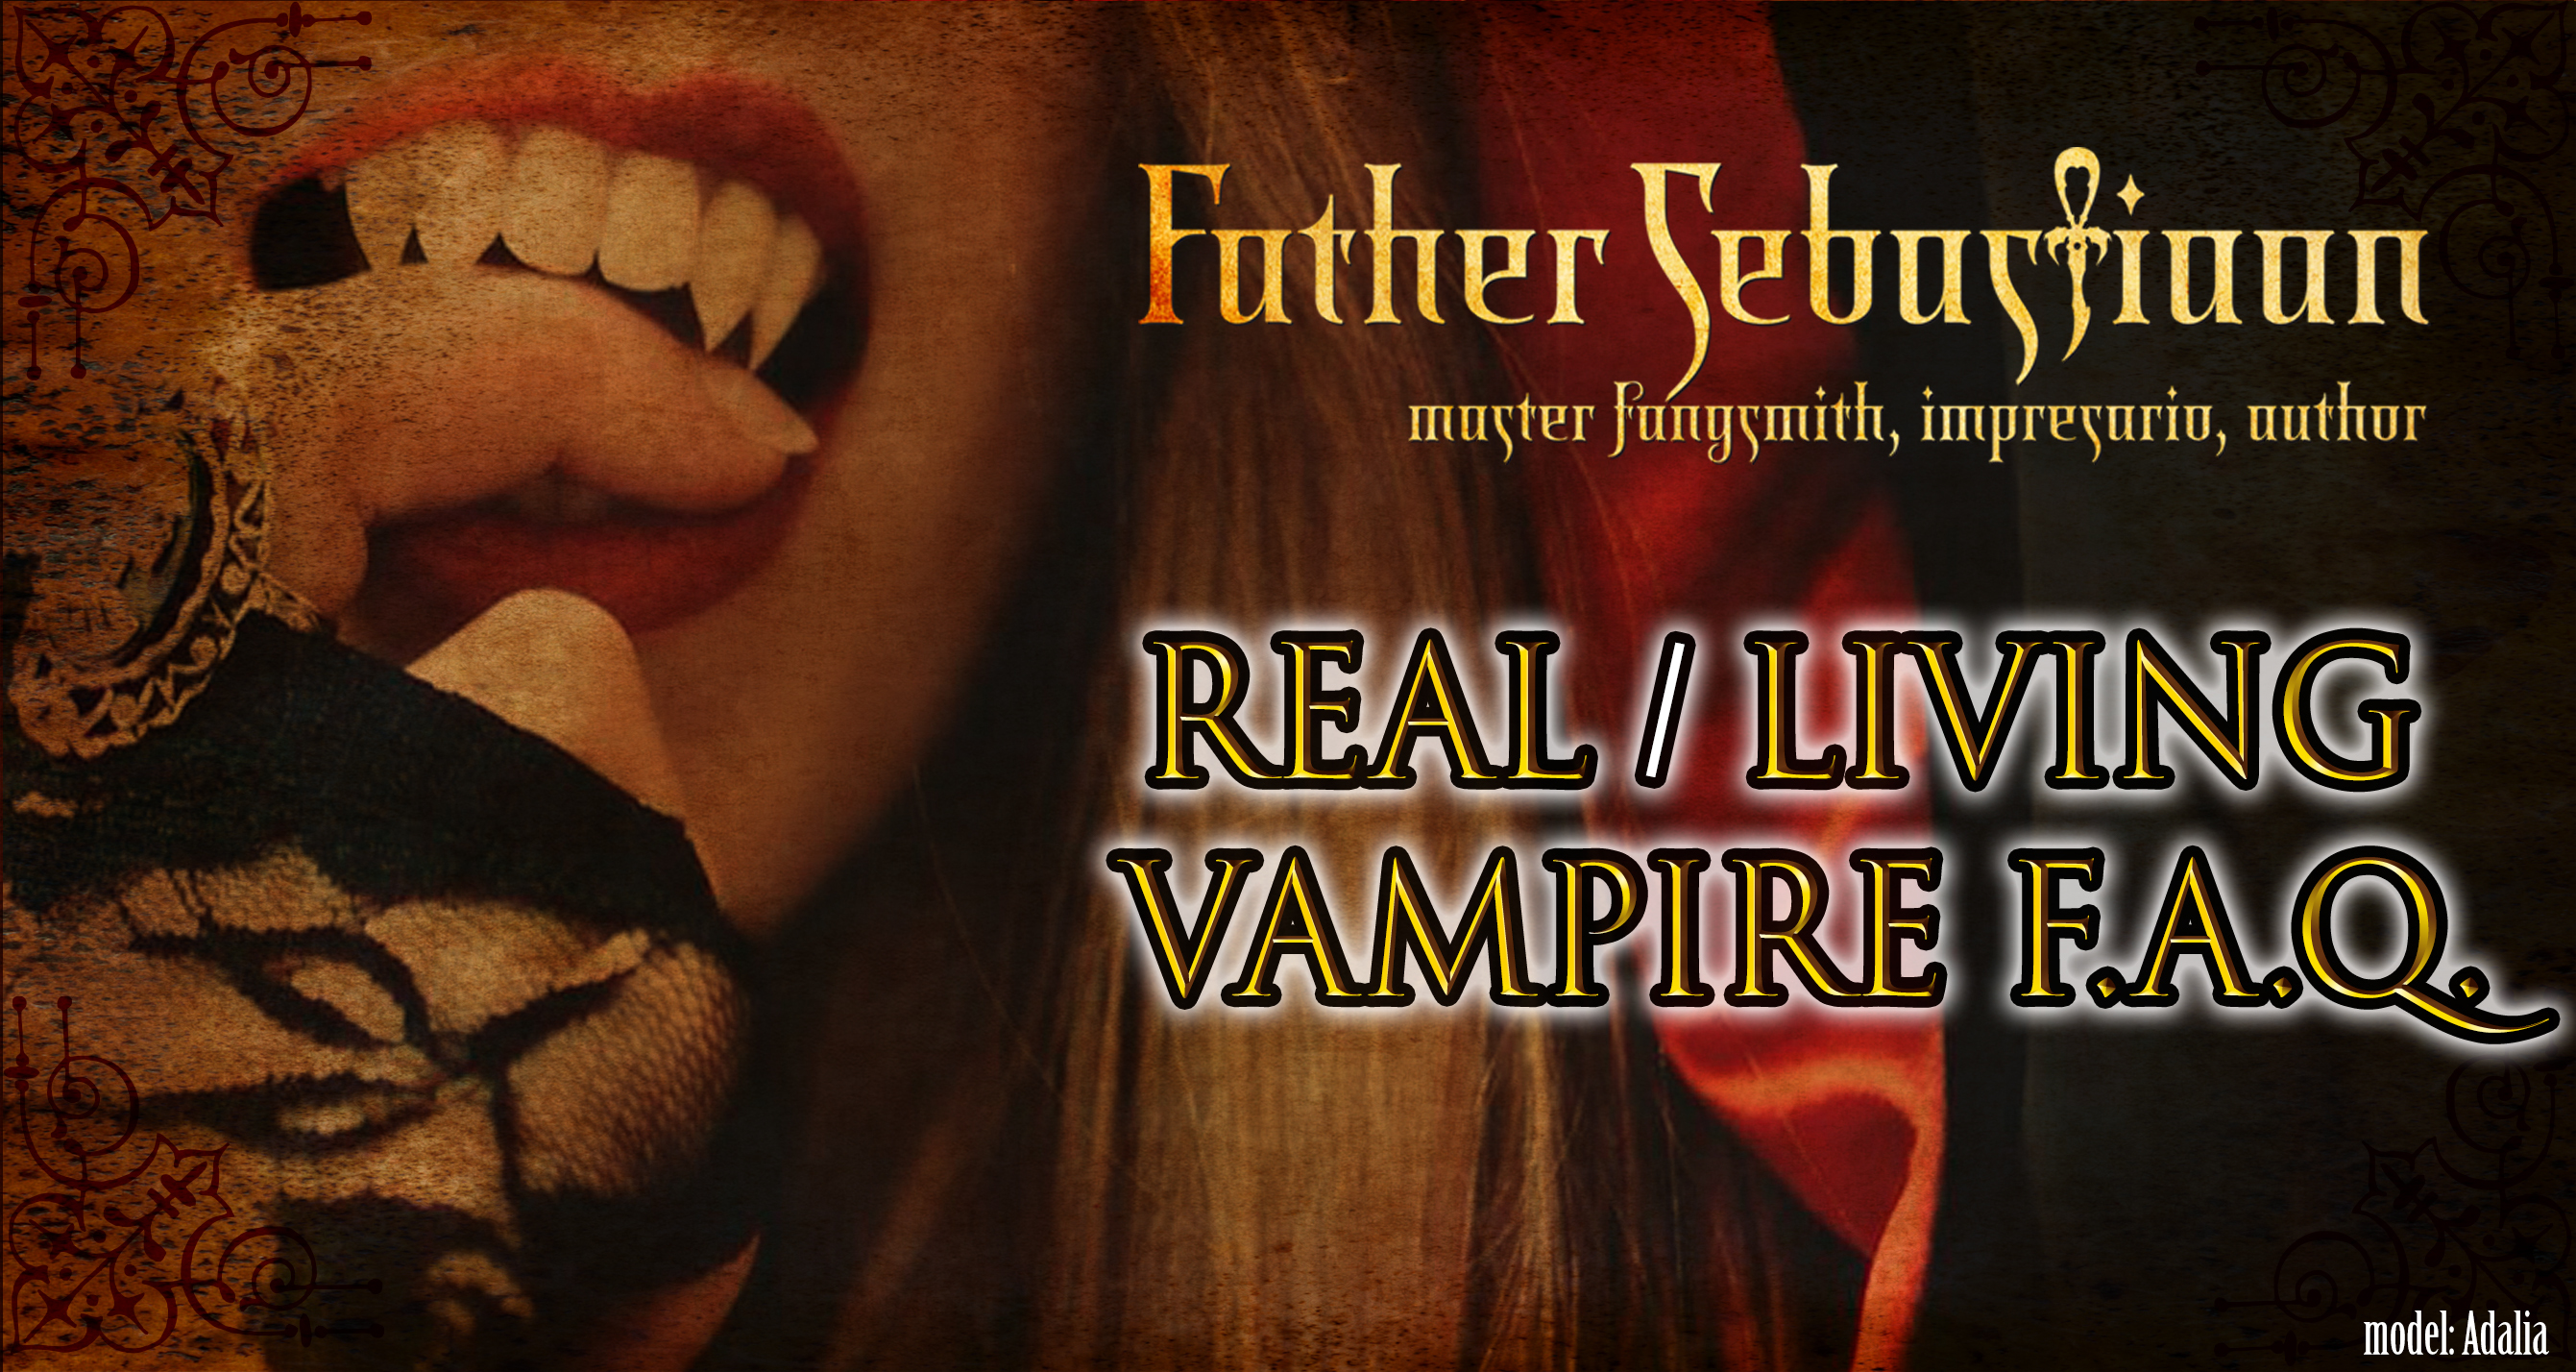 The Living Vampire / Real Vampire F.A.Q. (Frequently Asked Questions)